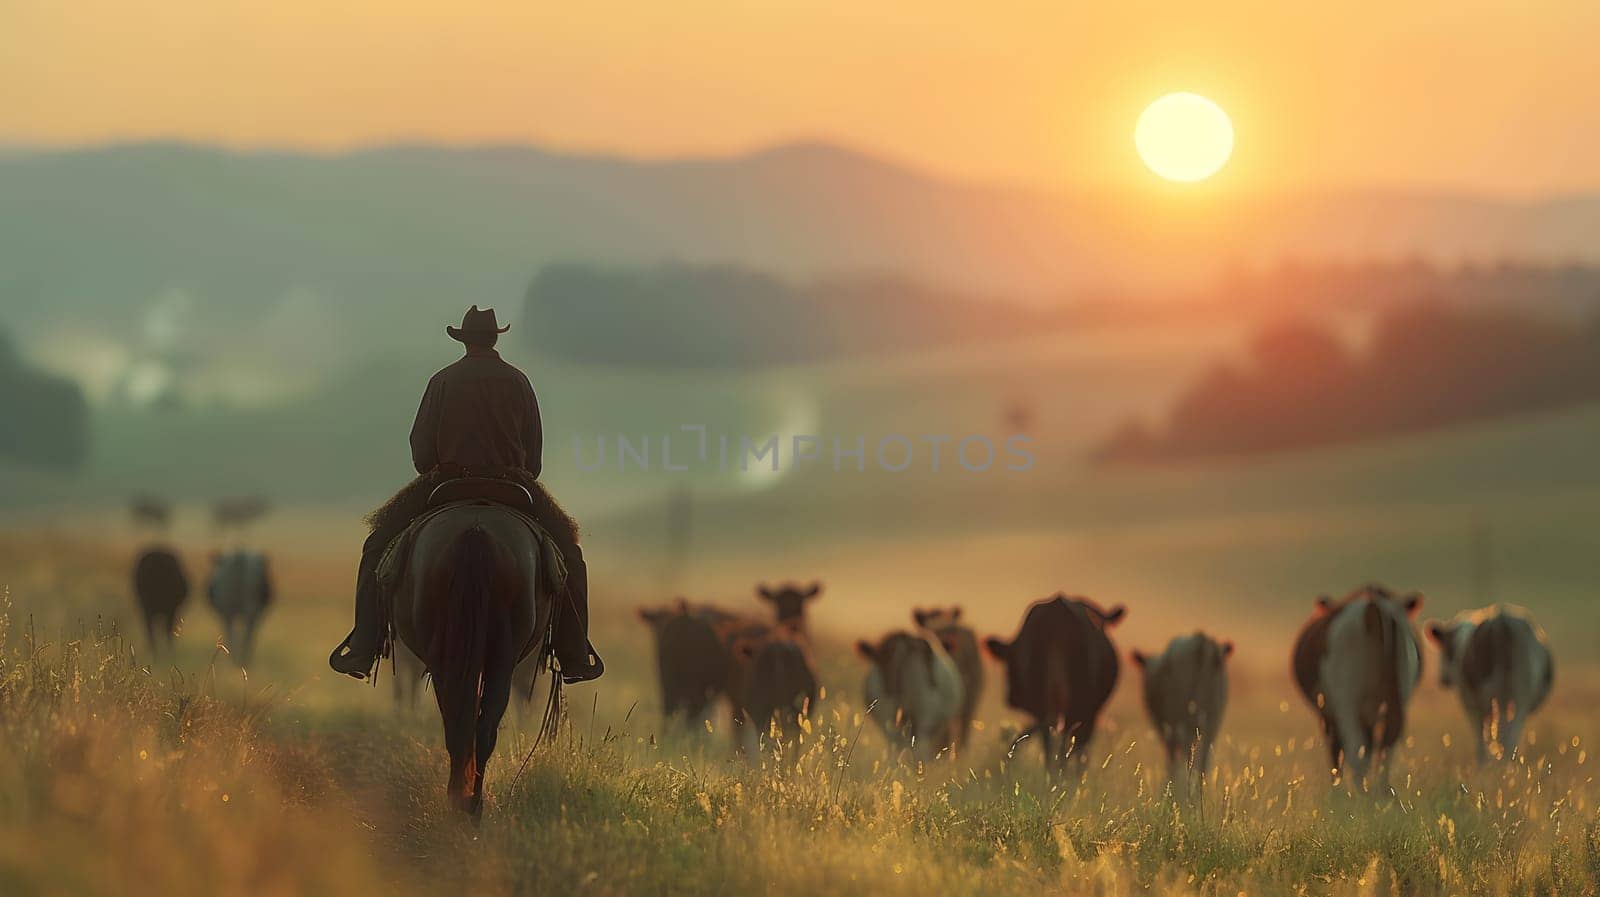 A man is riding a horse on a grassland plain in the morning, surrounded by a herd of cows under a cloudy sky